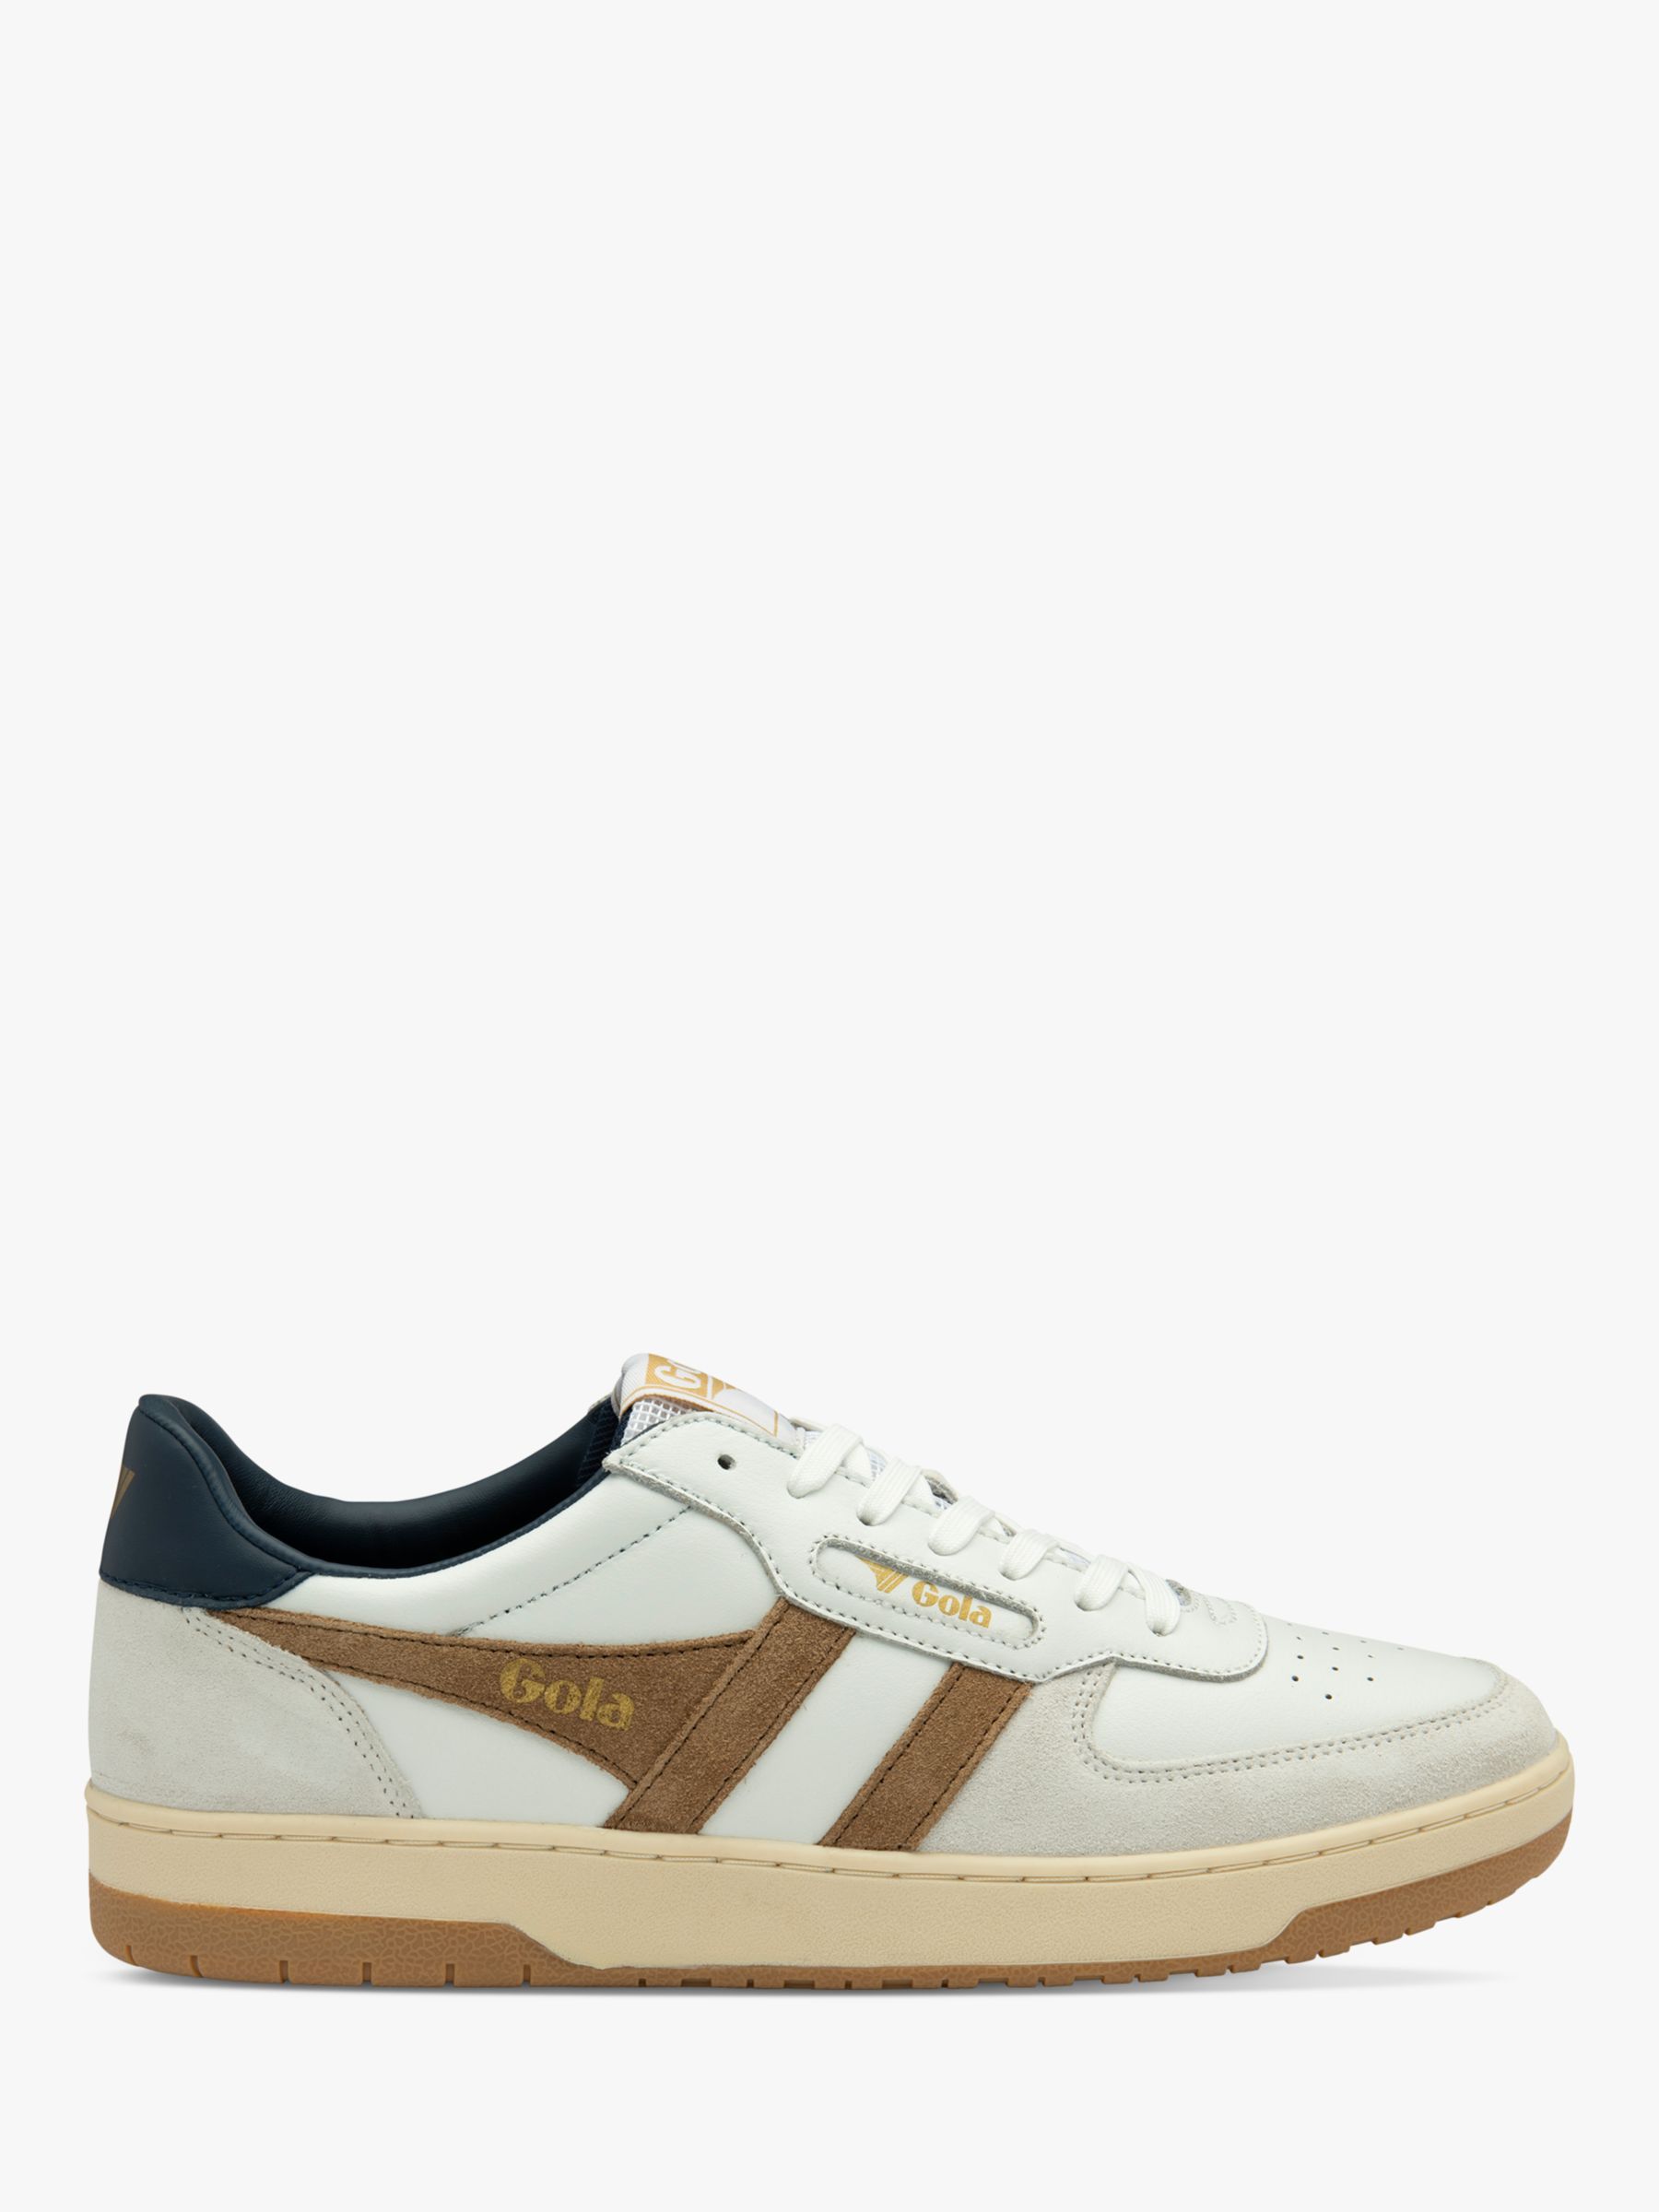 Gola Classics Hawk Leather Lace Up Trainers, White/Tobacco/Navy, 6